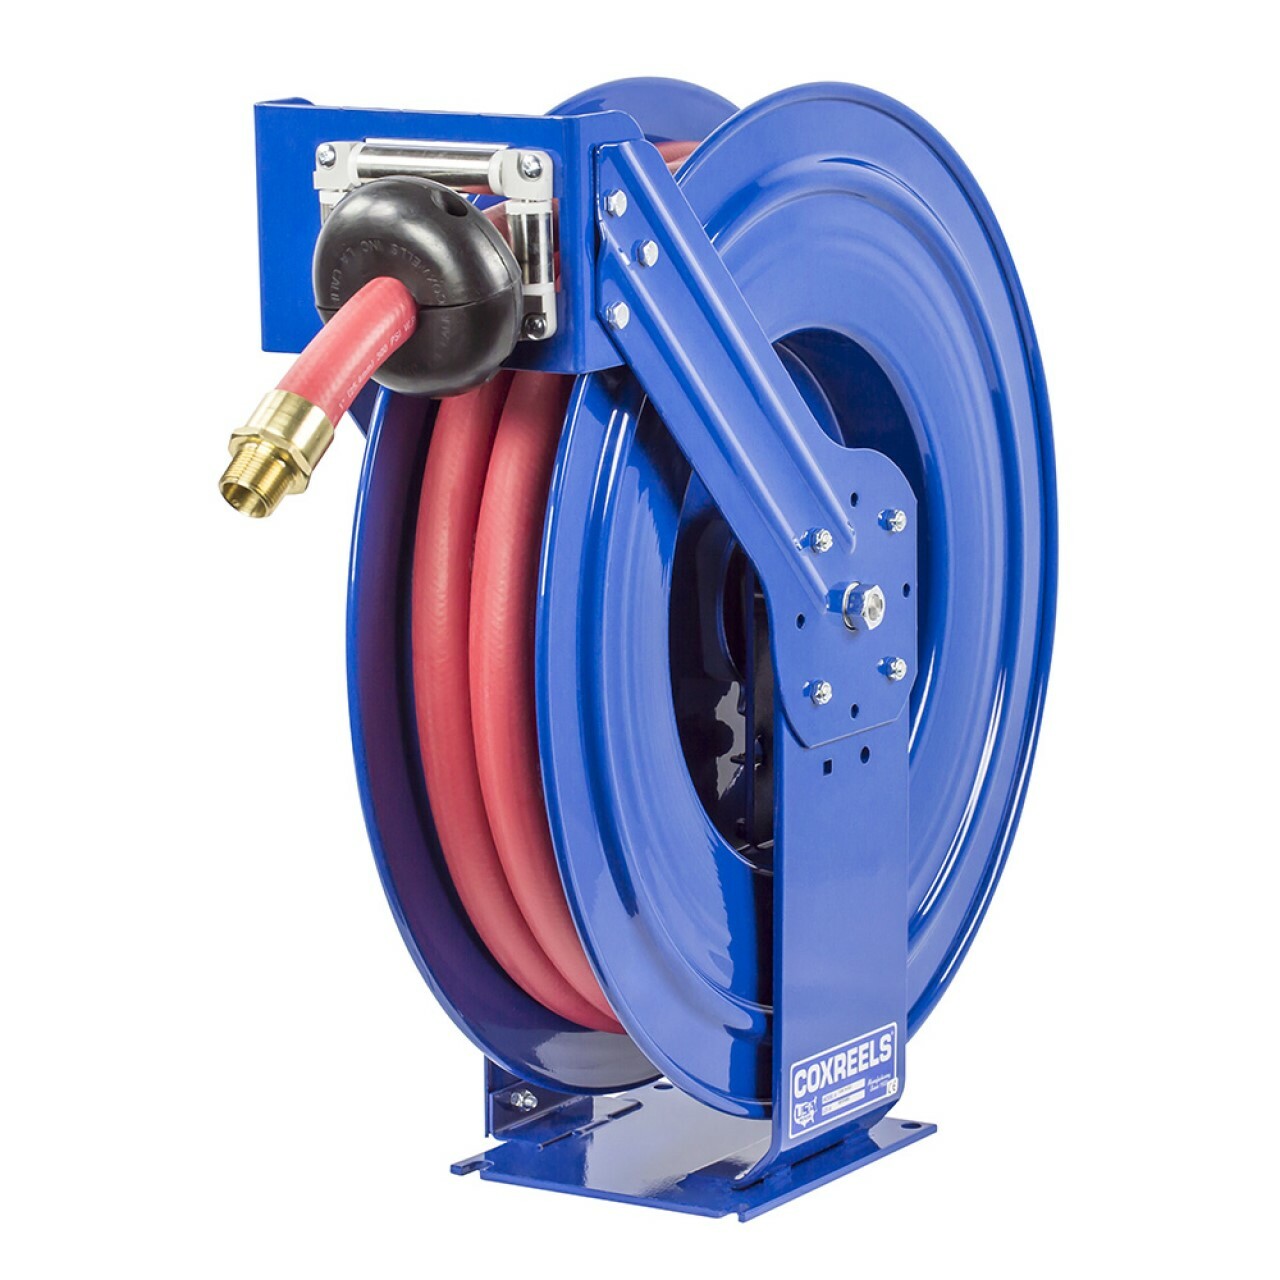 COX REELS TSHF-N-550* hose reel (with fuel hose) - ETS Co. Pressure Washers  and More!